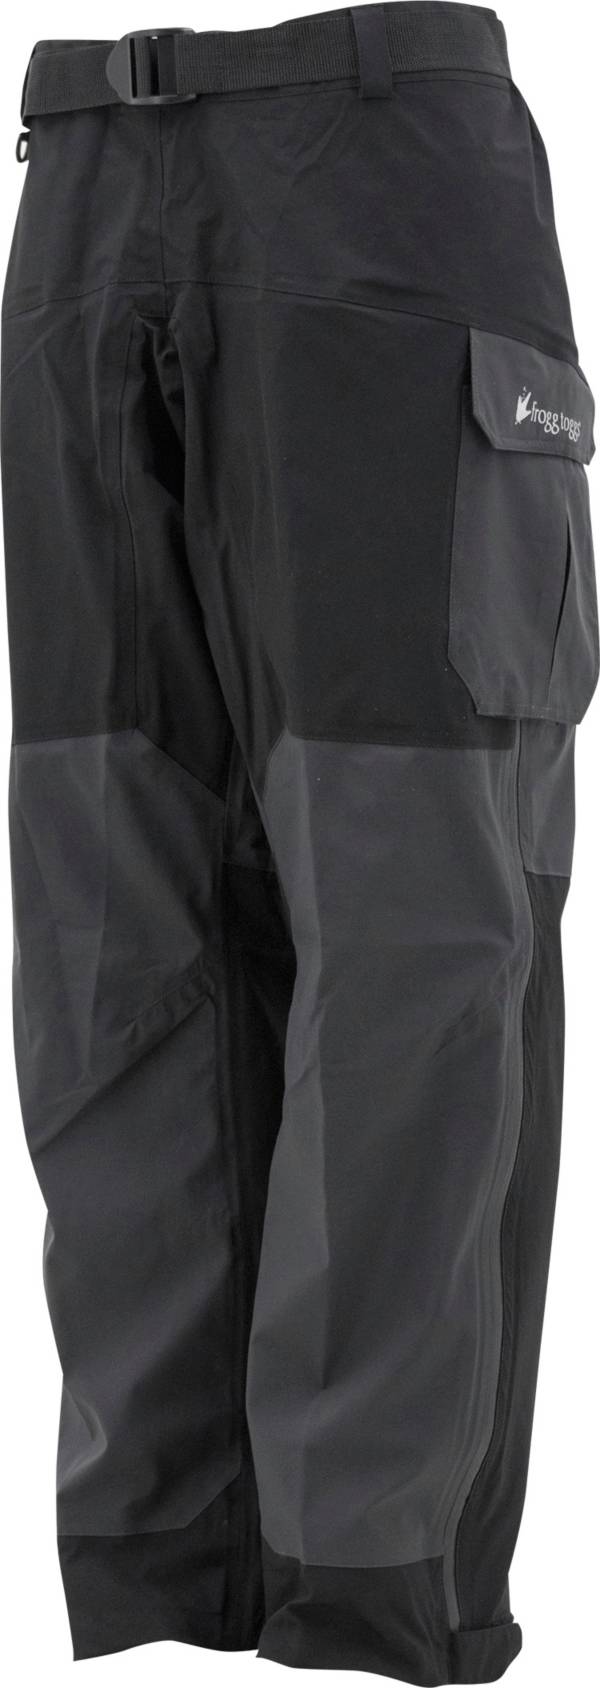 frogg toggs Men's Pilot Guide Fishing Pants product image